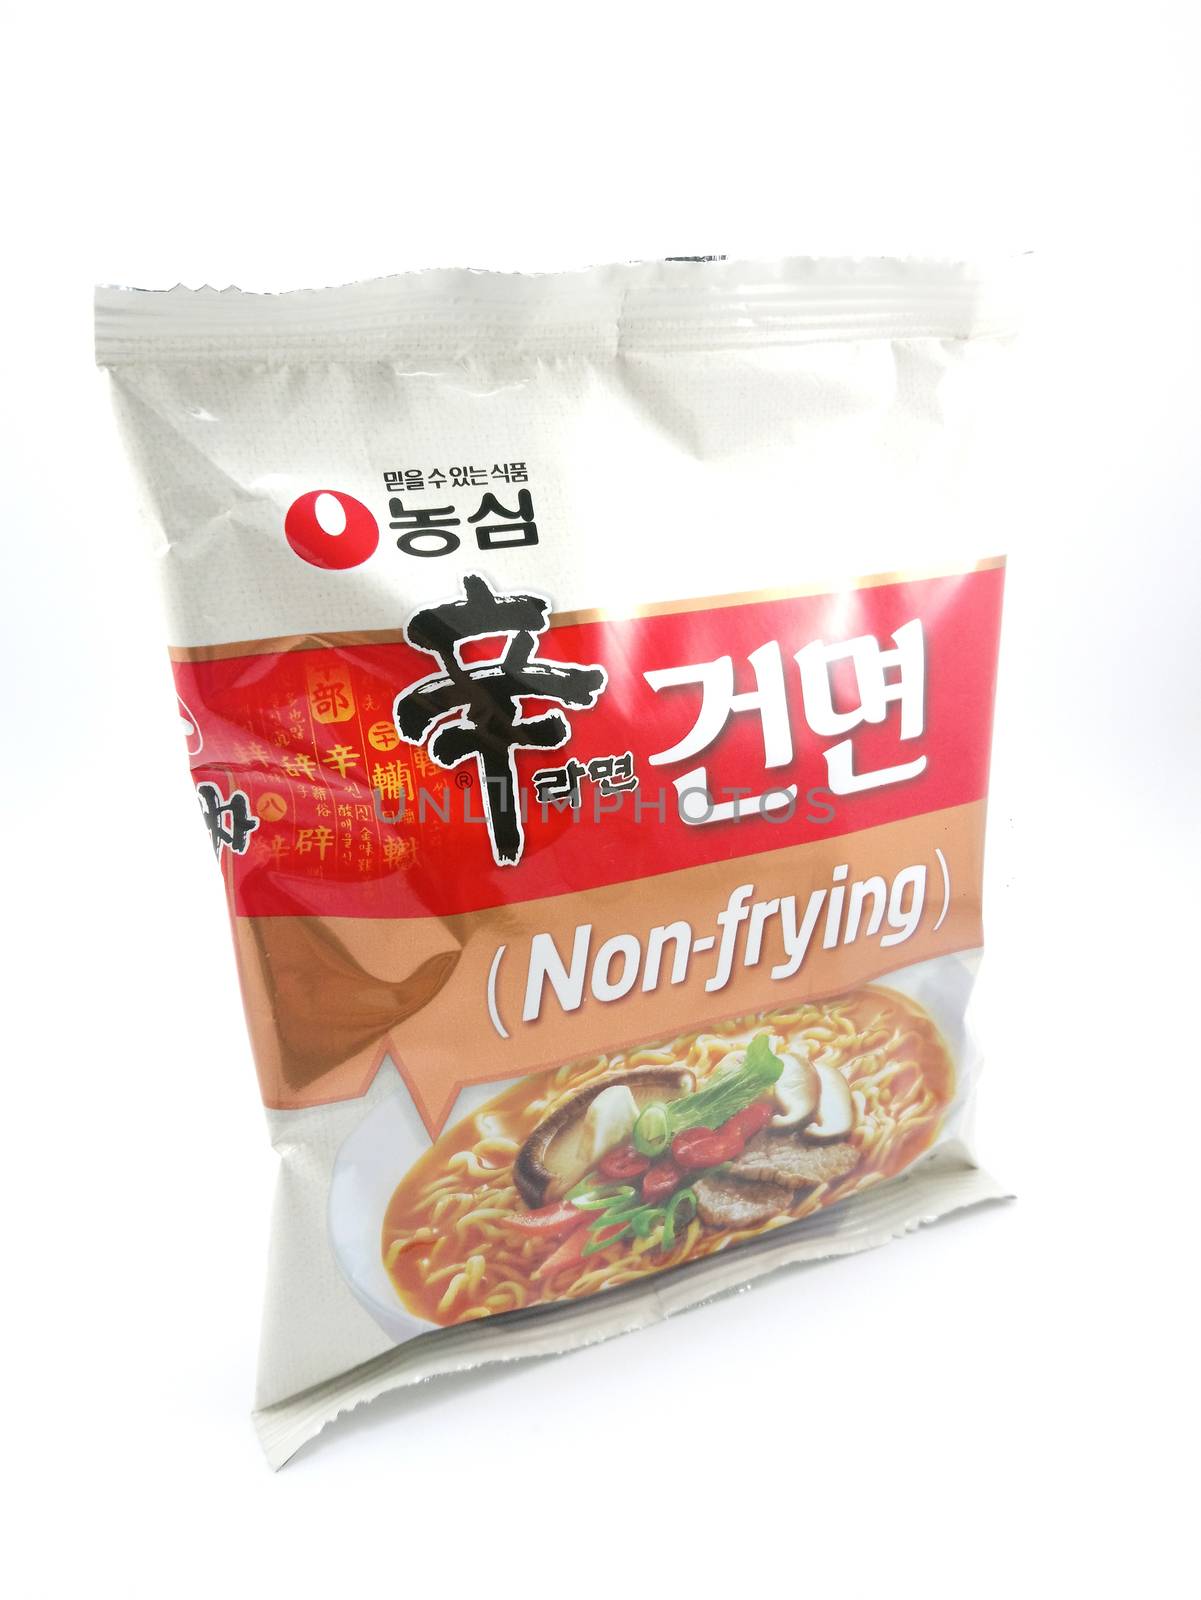 Nongshim non frying ramen noodles in Manila, Philippines by imwaltersy